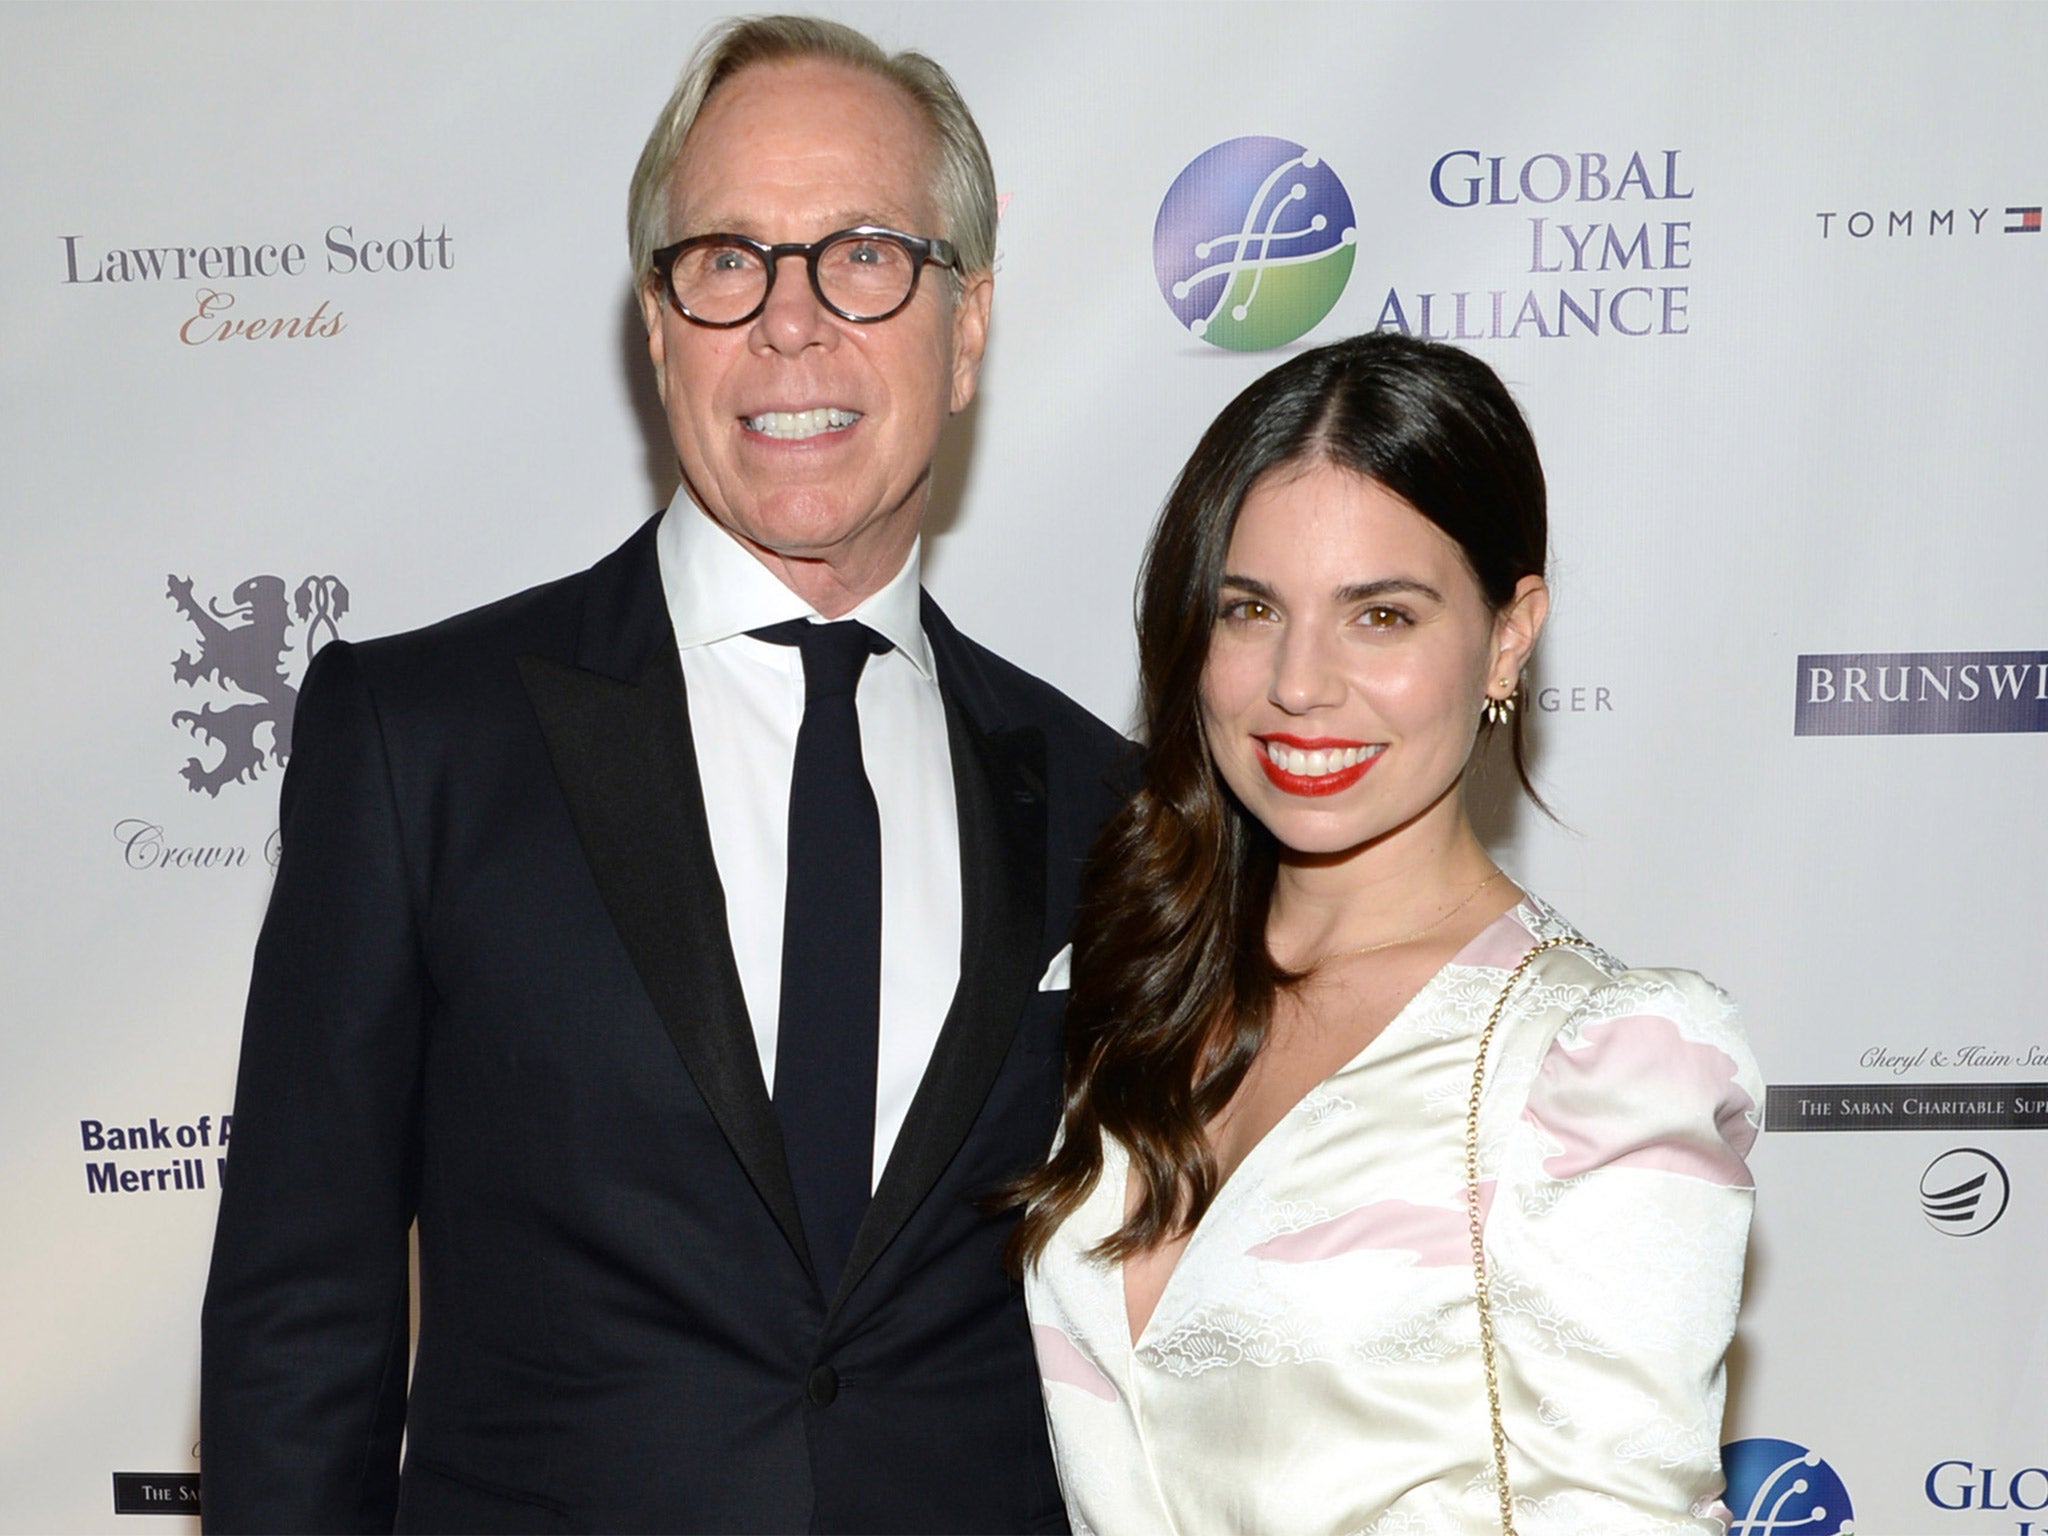 Tommy and Ally Hilfiger at the Global Lyme Alliance Inaugural Gala in New York last week